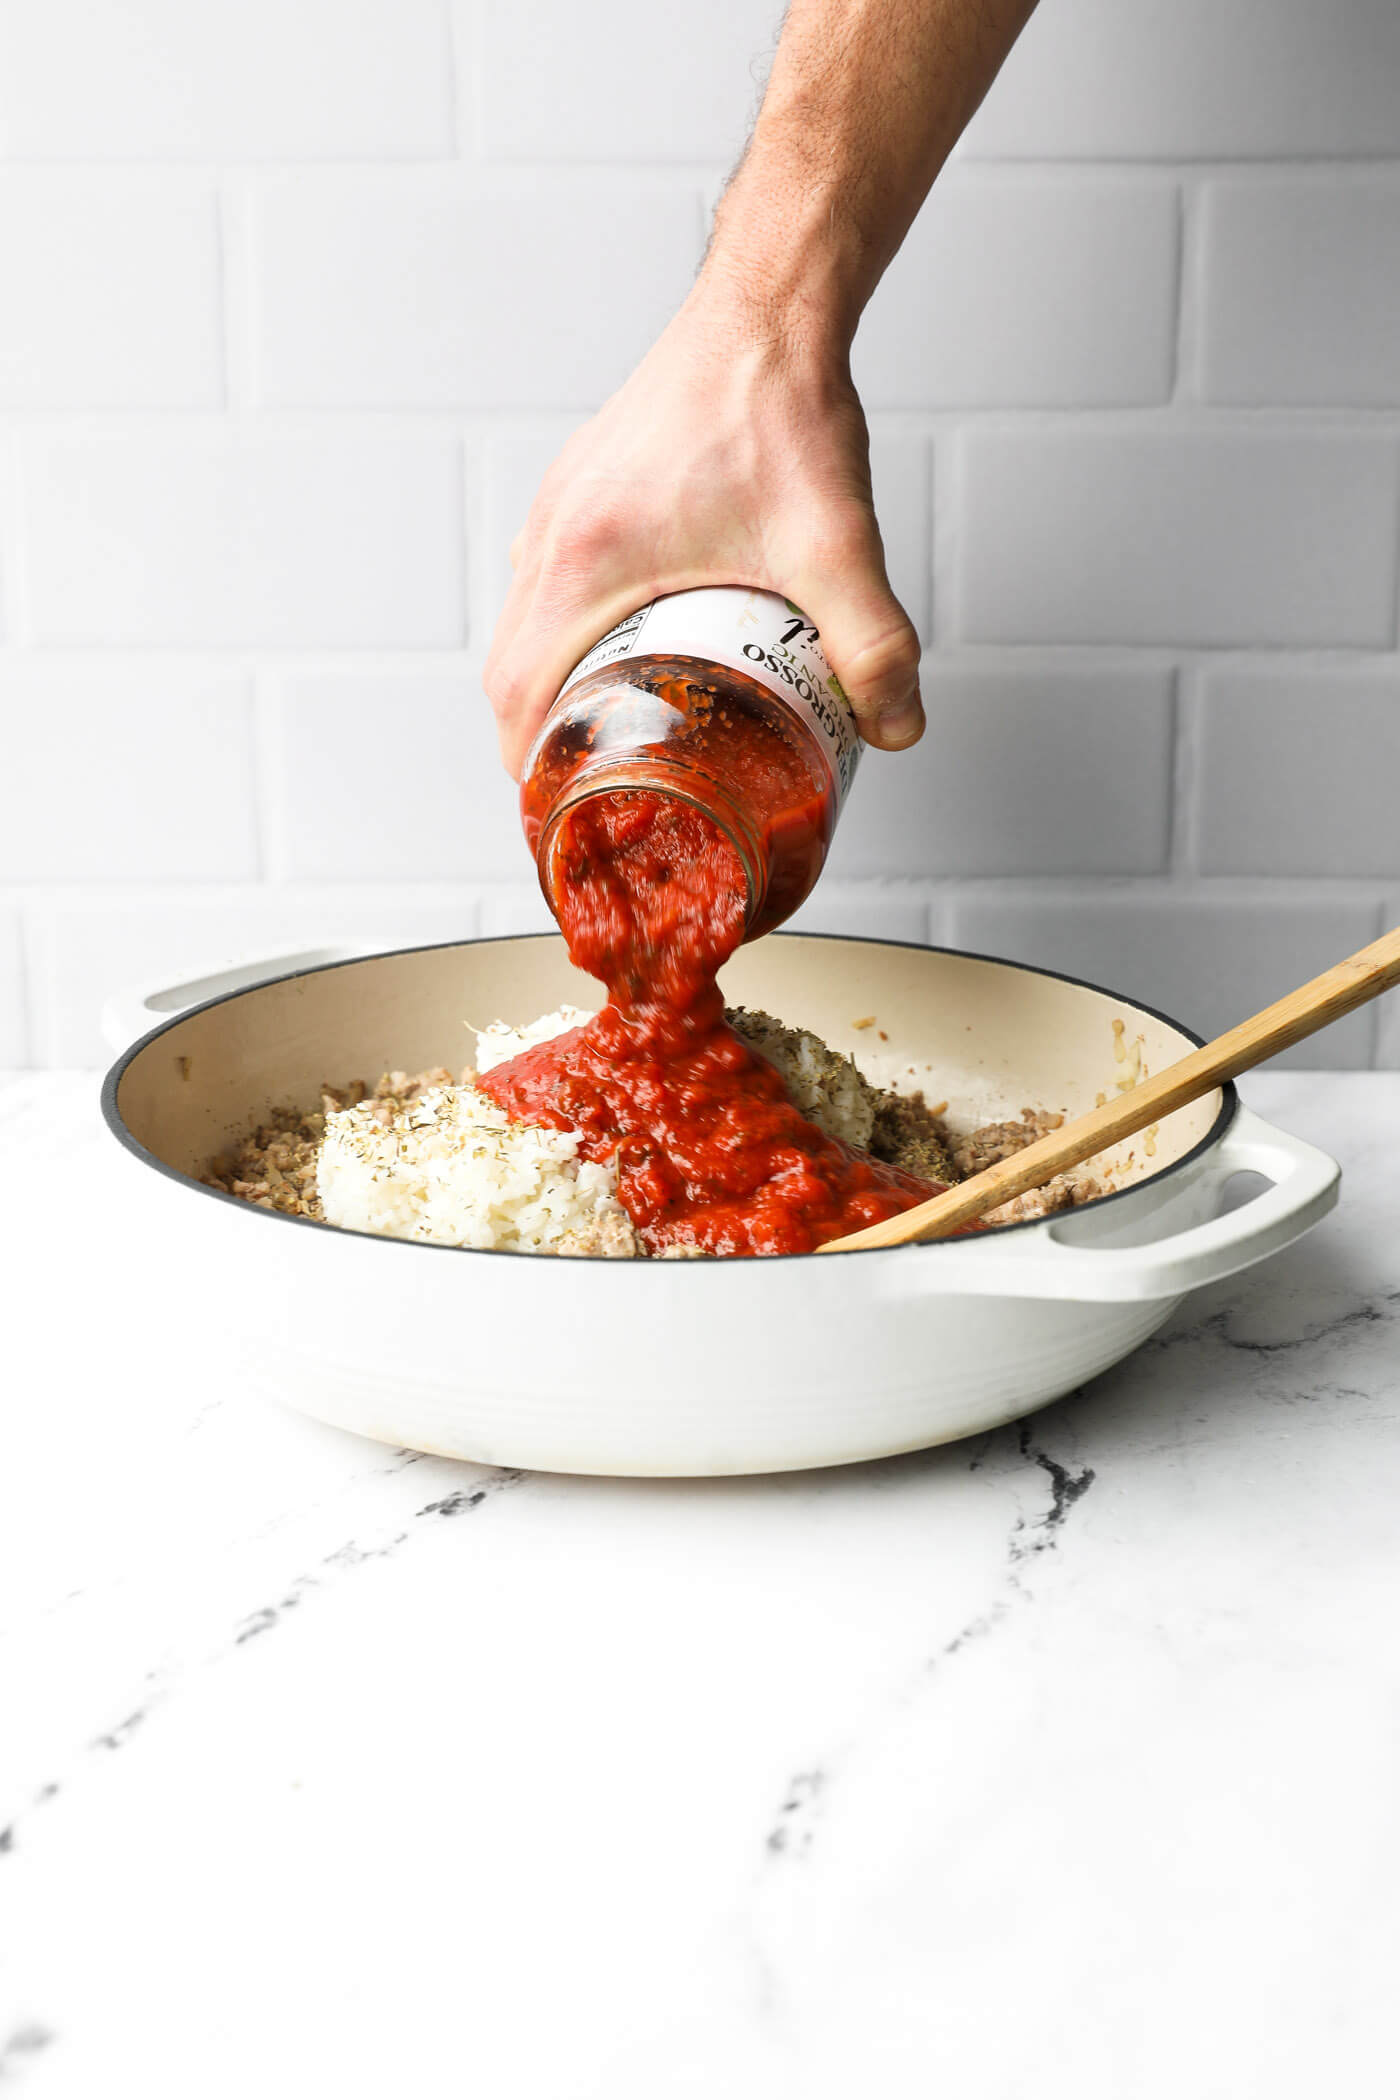 A hand pouring marinara sauce into the skillet over the cooked white rice, ground pork and seasoning.